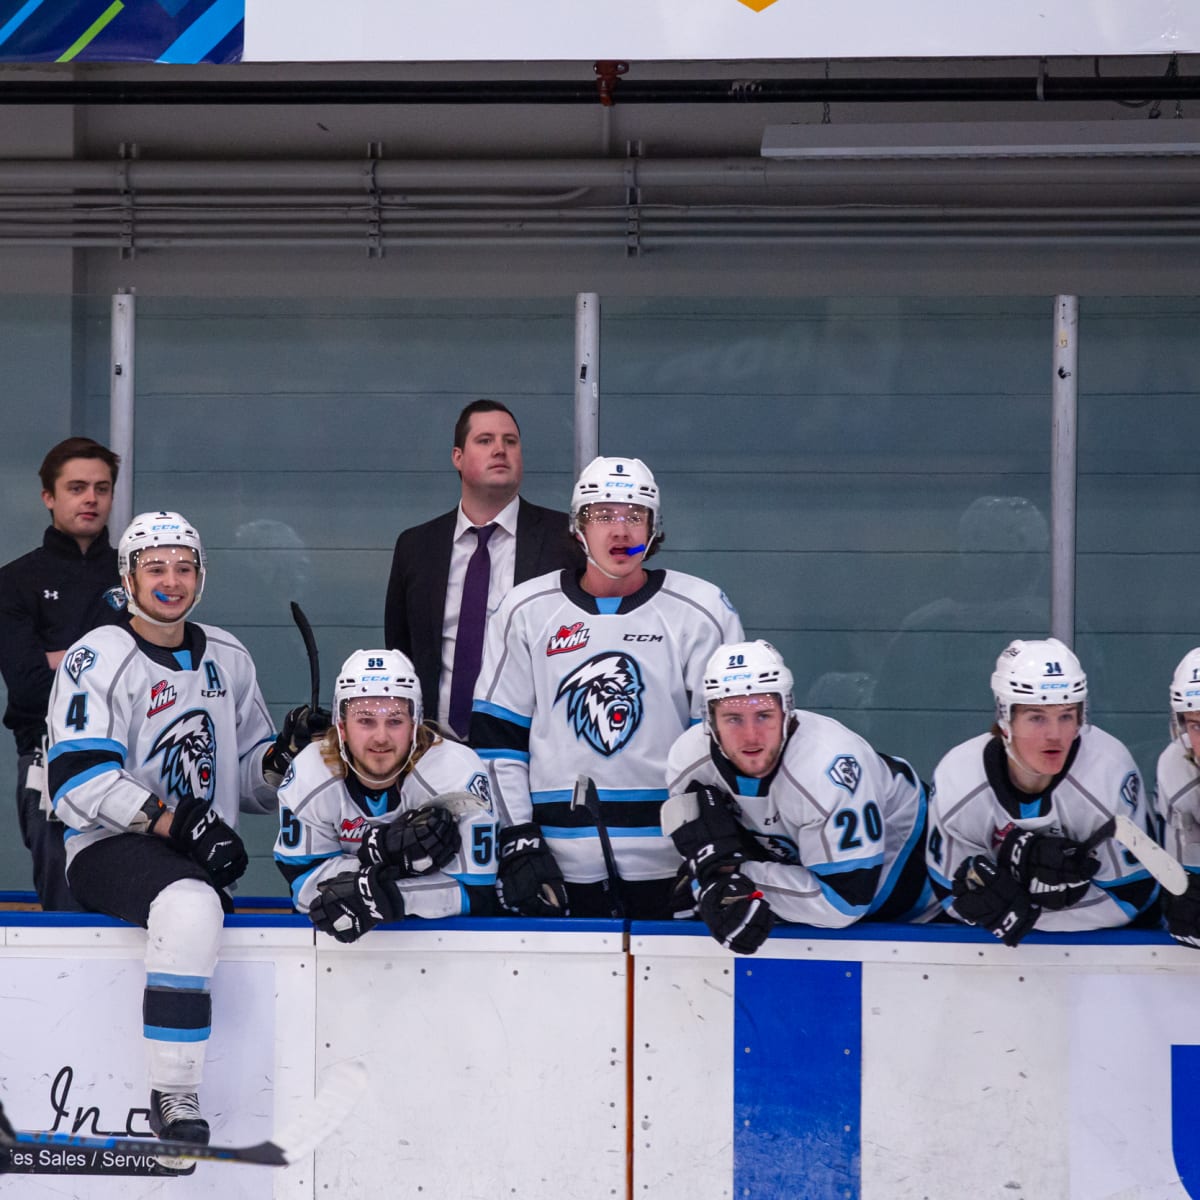 State deals with whether Western Hockey League players should be paid  employees